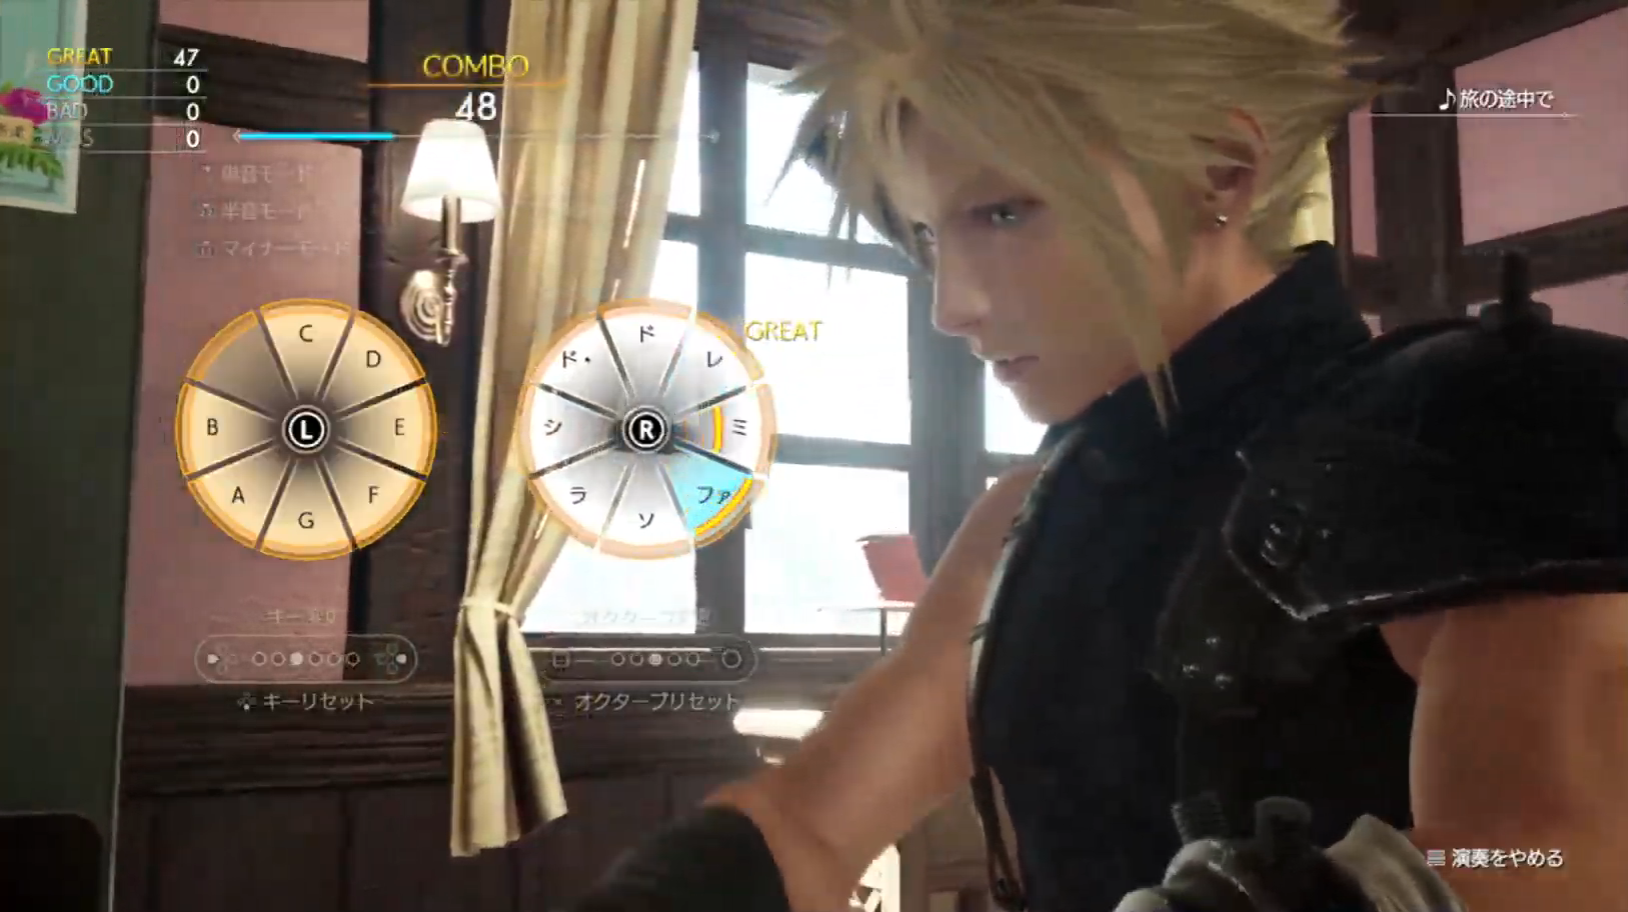 Final Fantasy VII Rebirth Reveals Over 30 Minutes of Gameplay Featuring Piano Minigame, Chocobo Farm, Kalm, Chadley & More